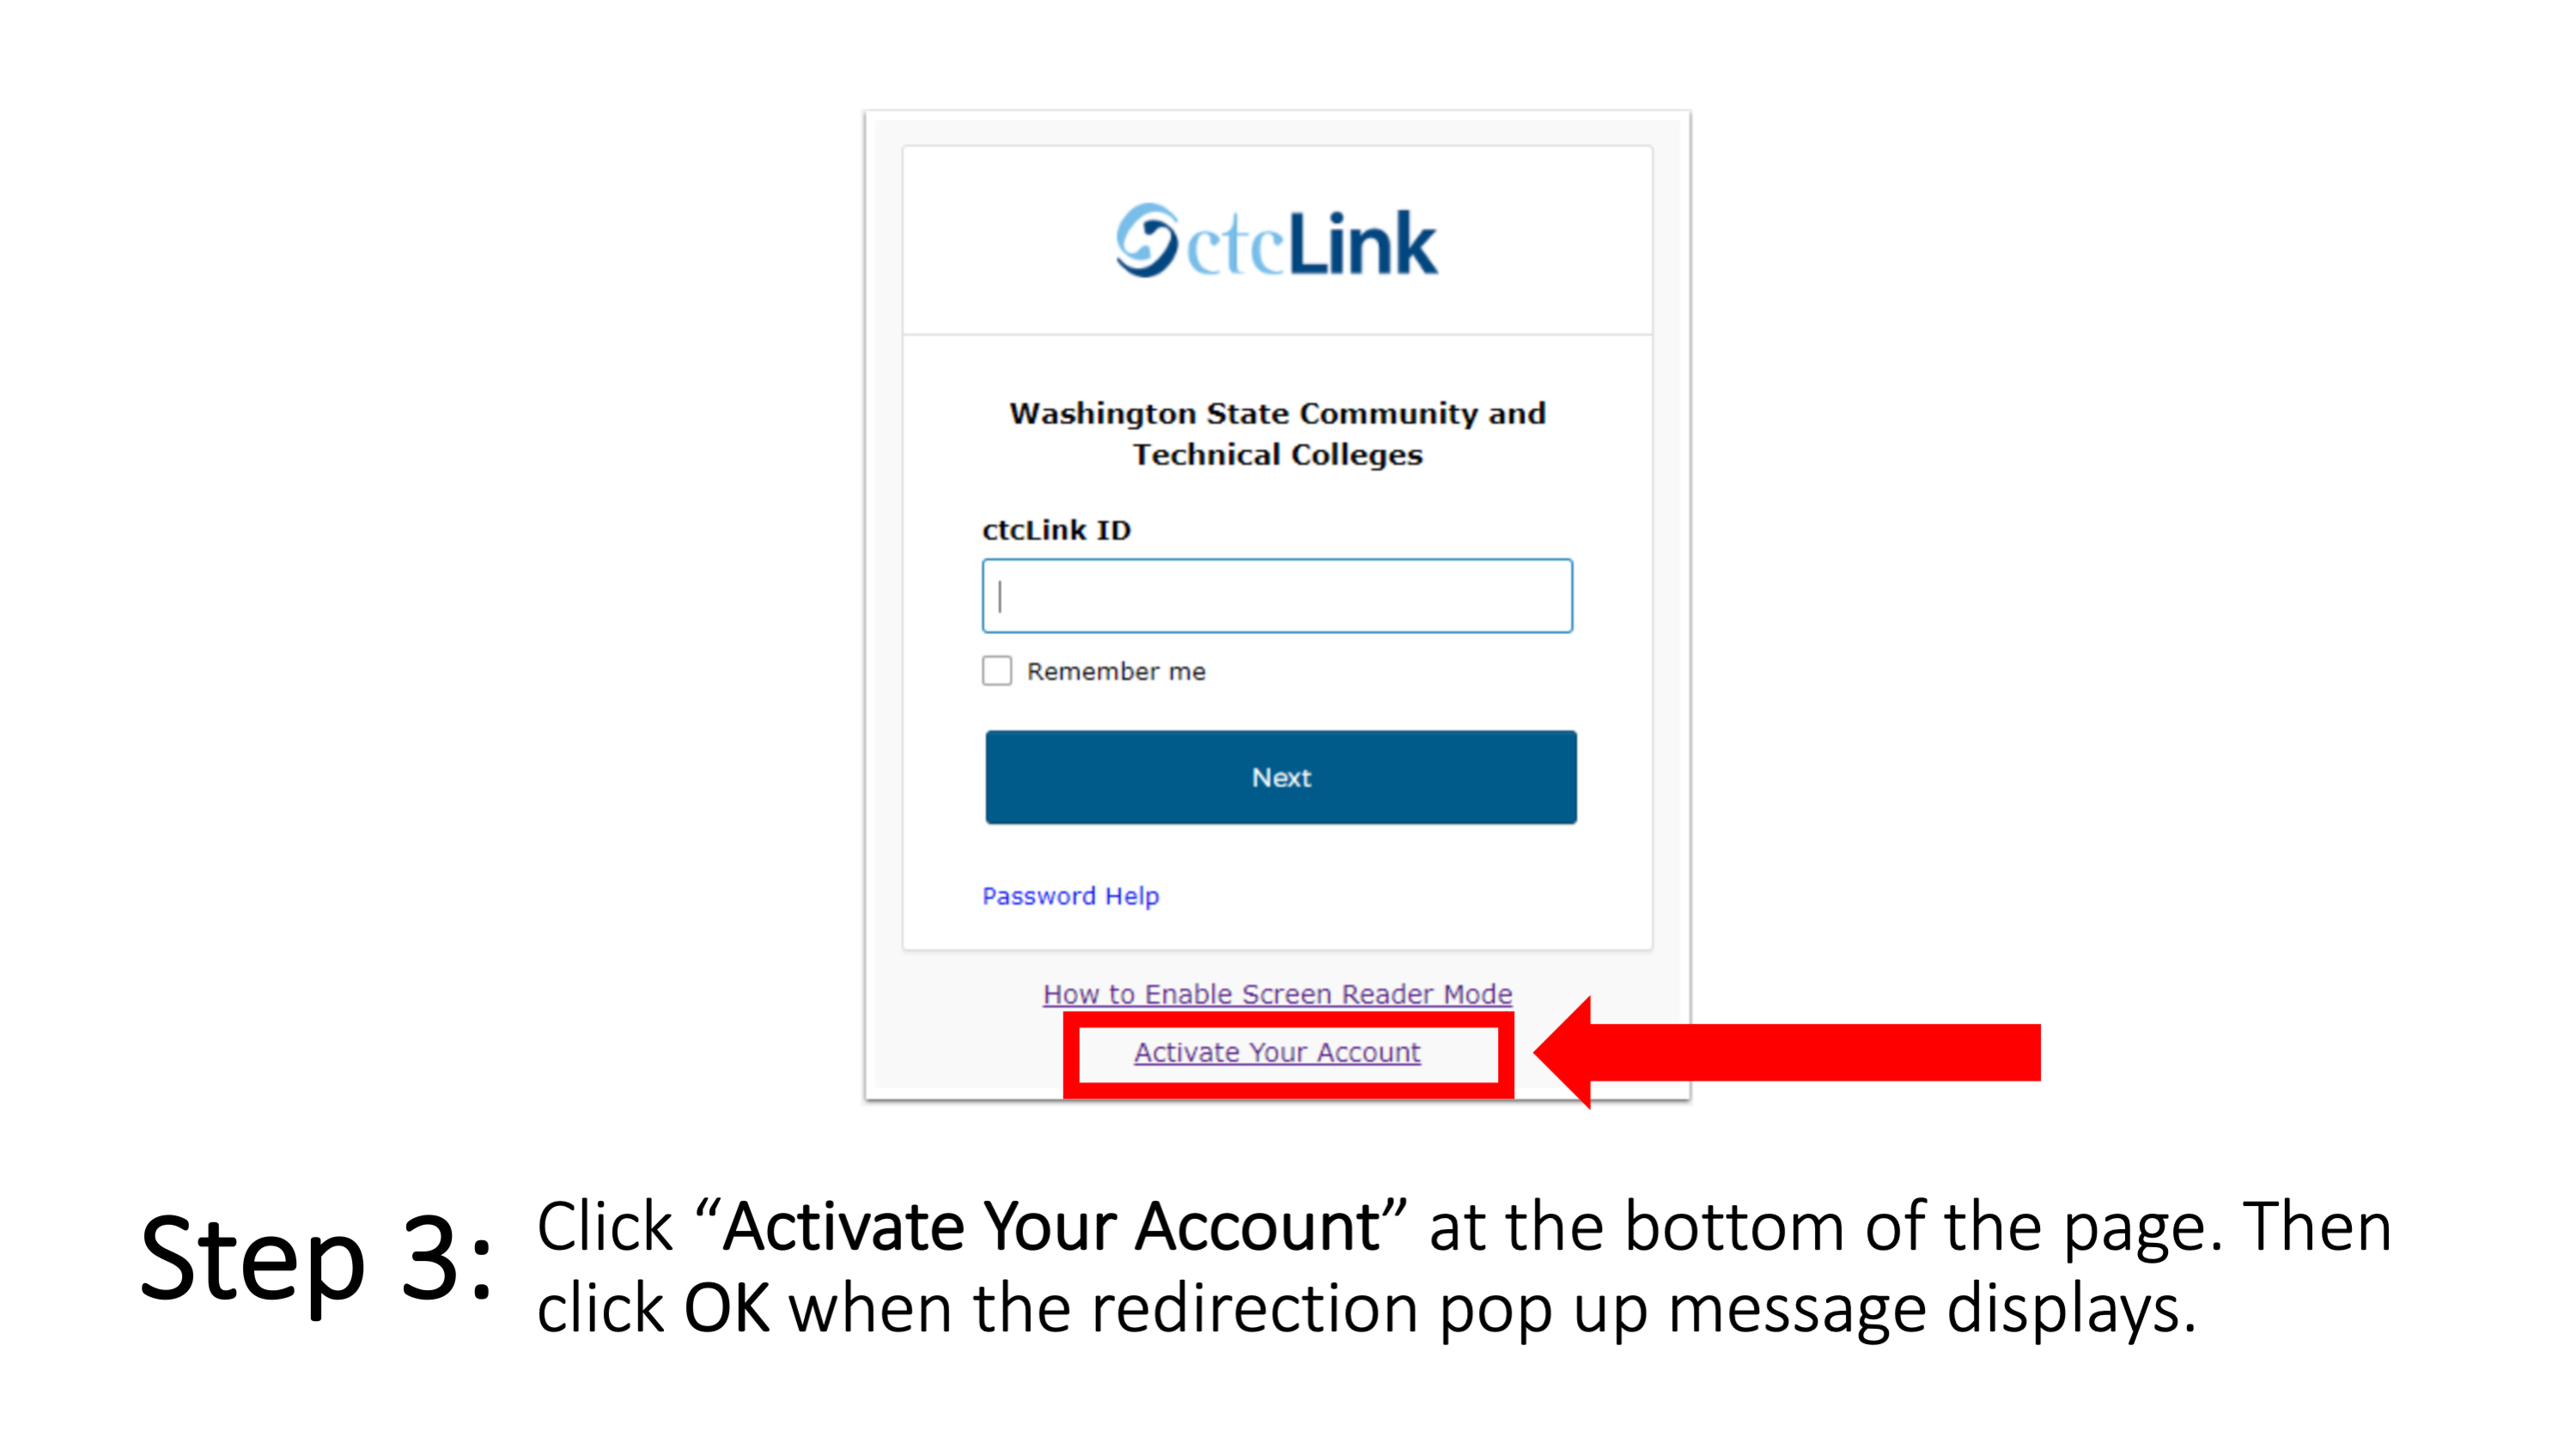 Step 3: Click “Activate Your Account” at the bottom of the page. Then click OK when the redirection pop up message displays. 